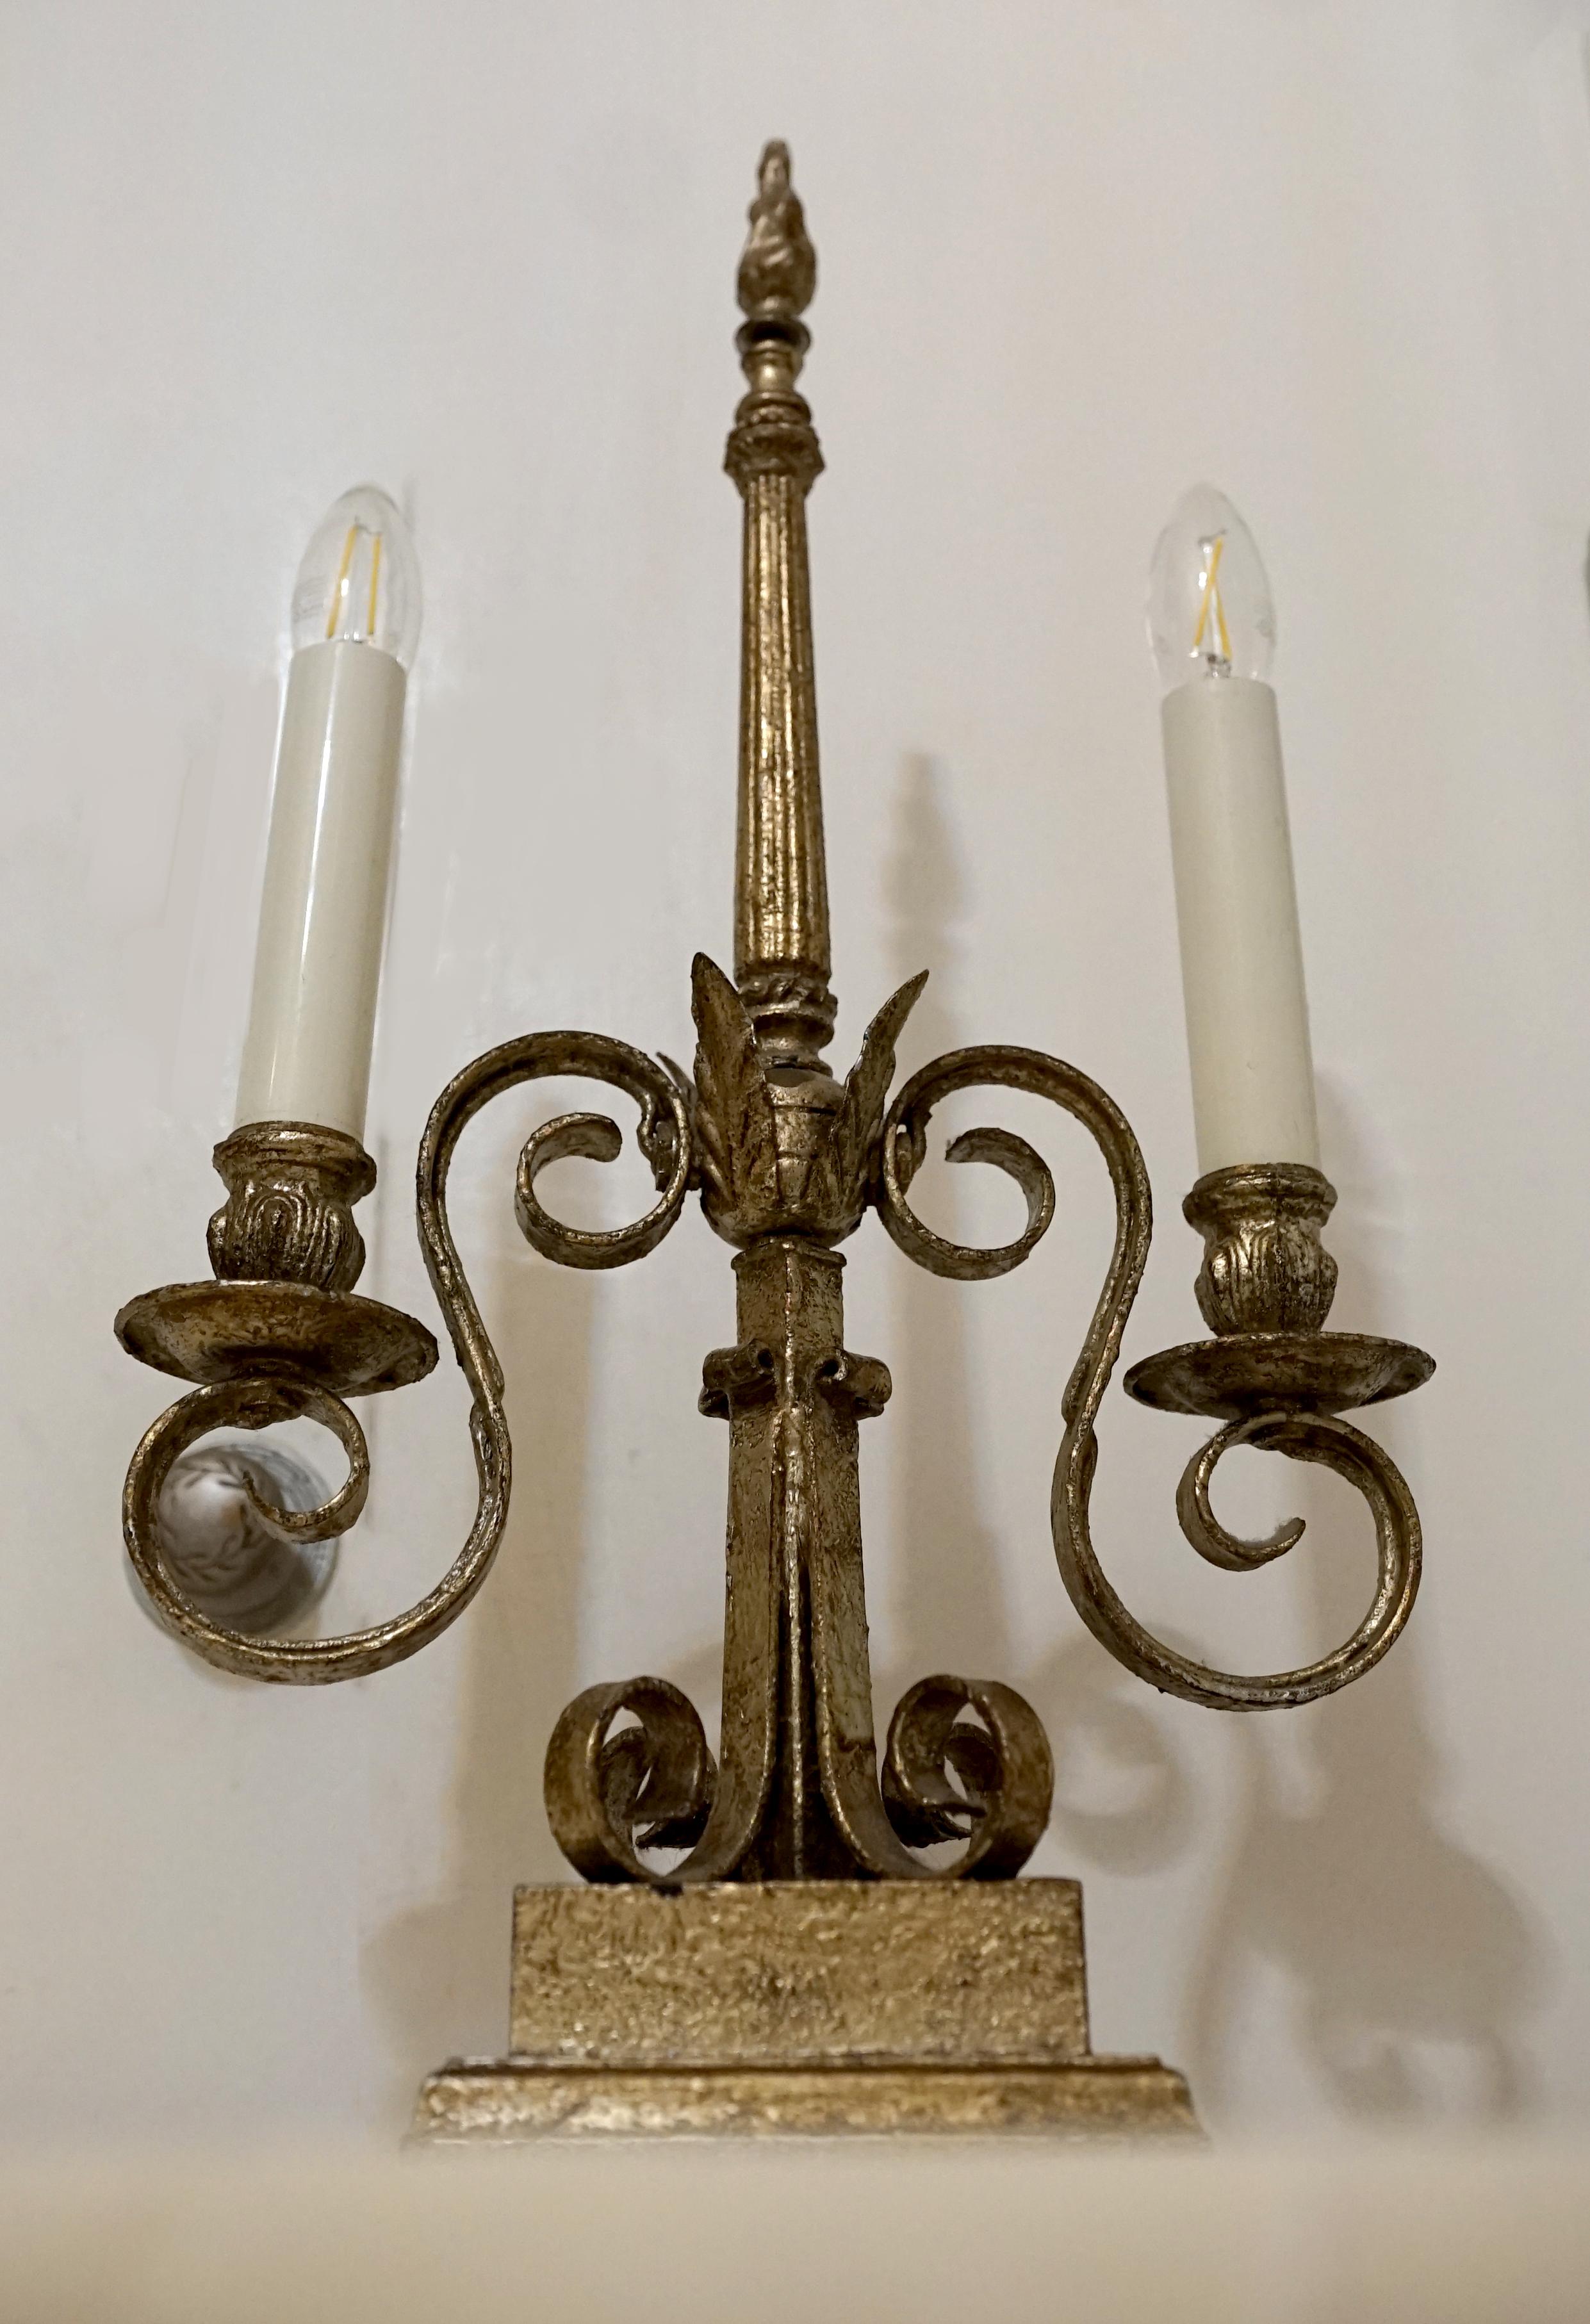 A beautiful two-light candelabra makes for perfect statement lighting. This lamp was produced circa 1925 to 1950, and it exudes design chic and grace. This is a heavy piece that includes iron scrolls and brass elements in a size that is not too big